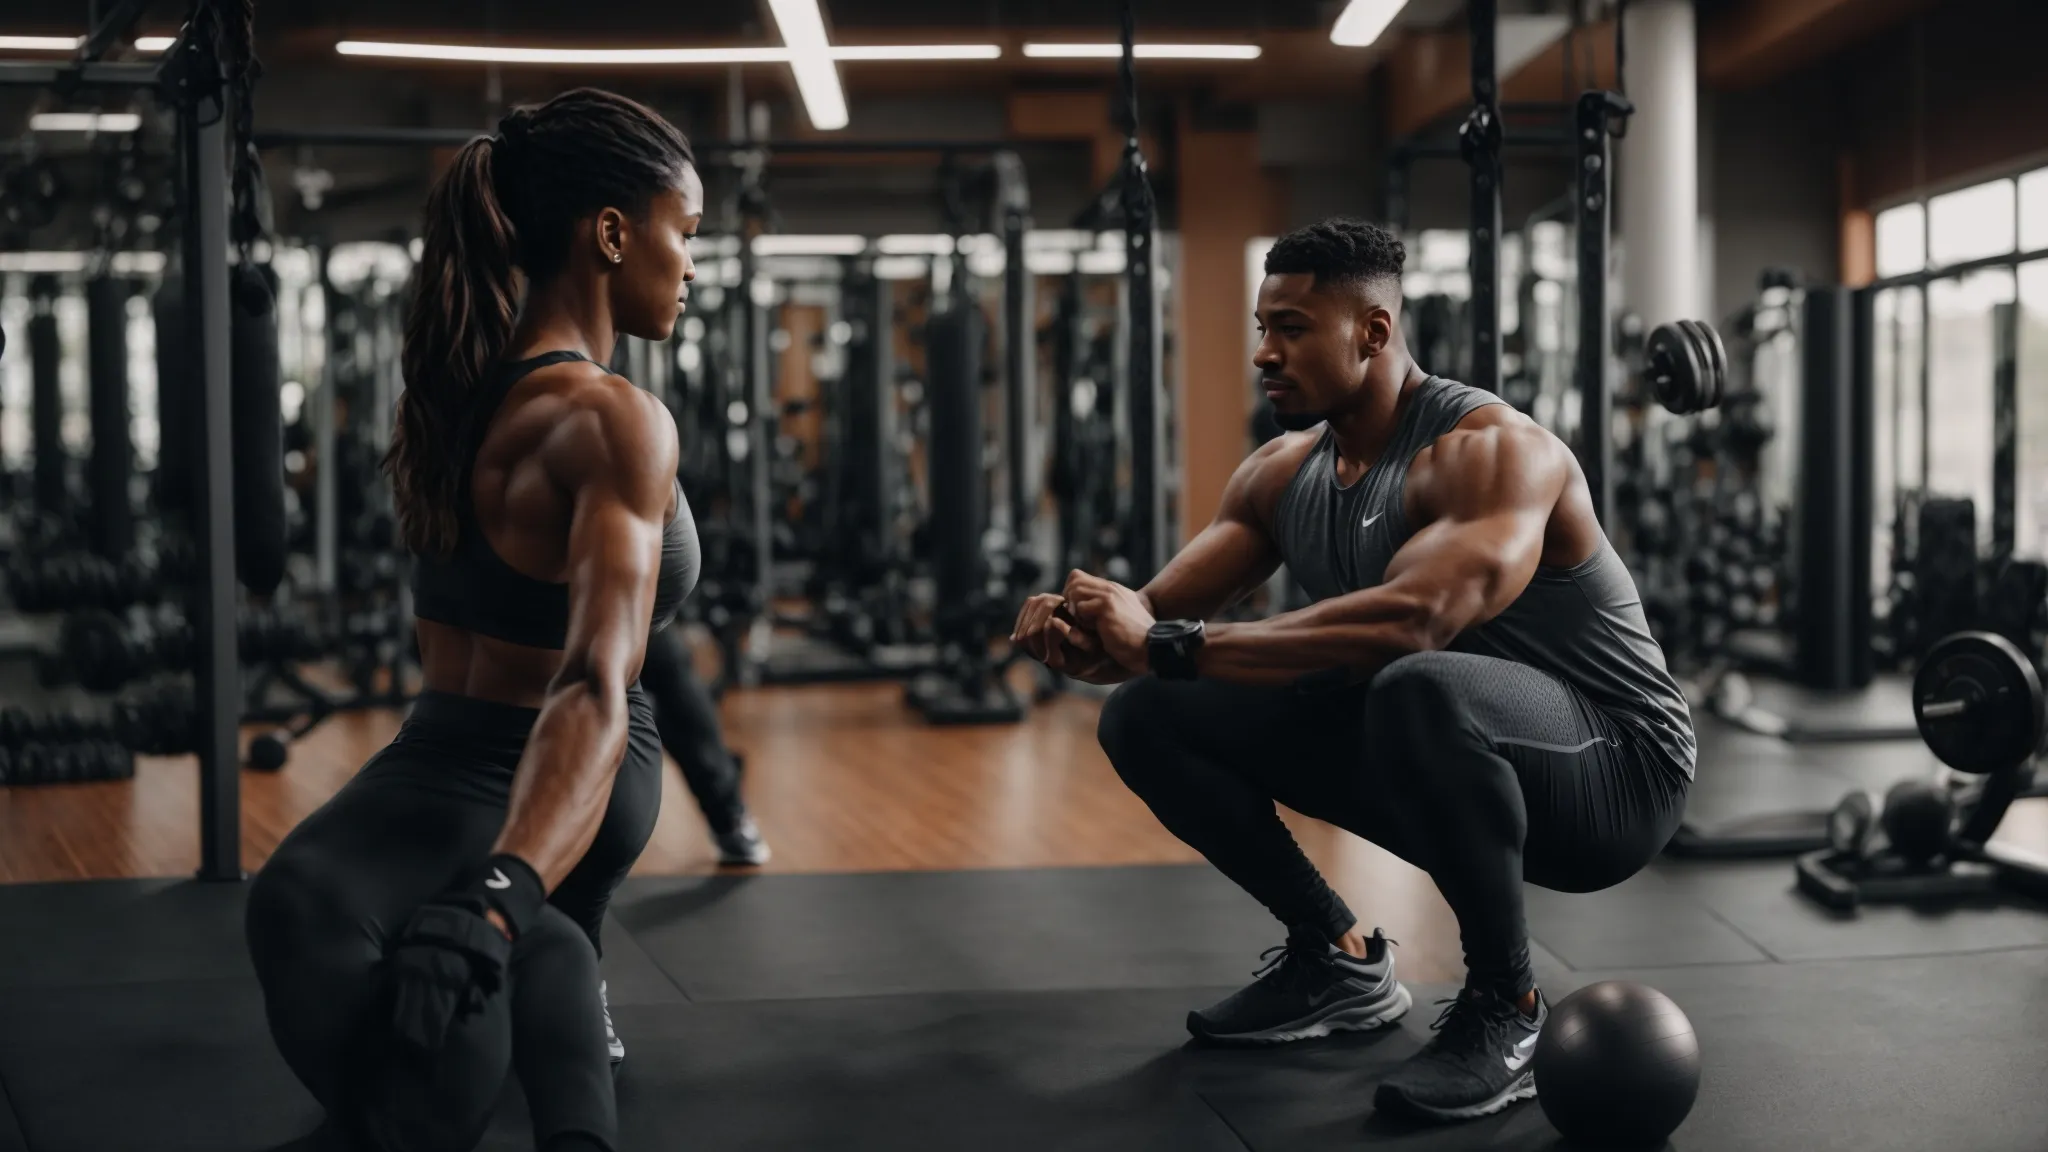 a fitness instructor discusses partnership opportunities with a health blogger in a well-equipped gym.